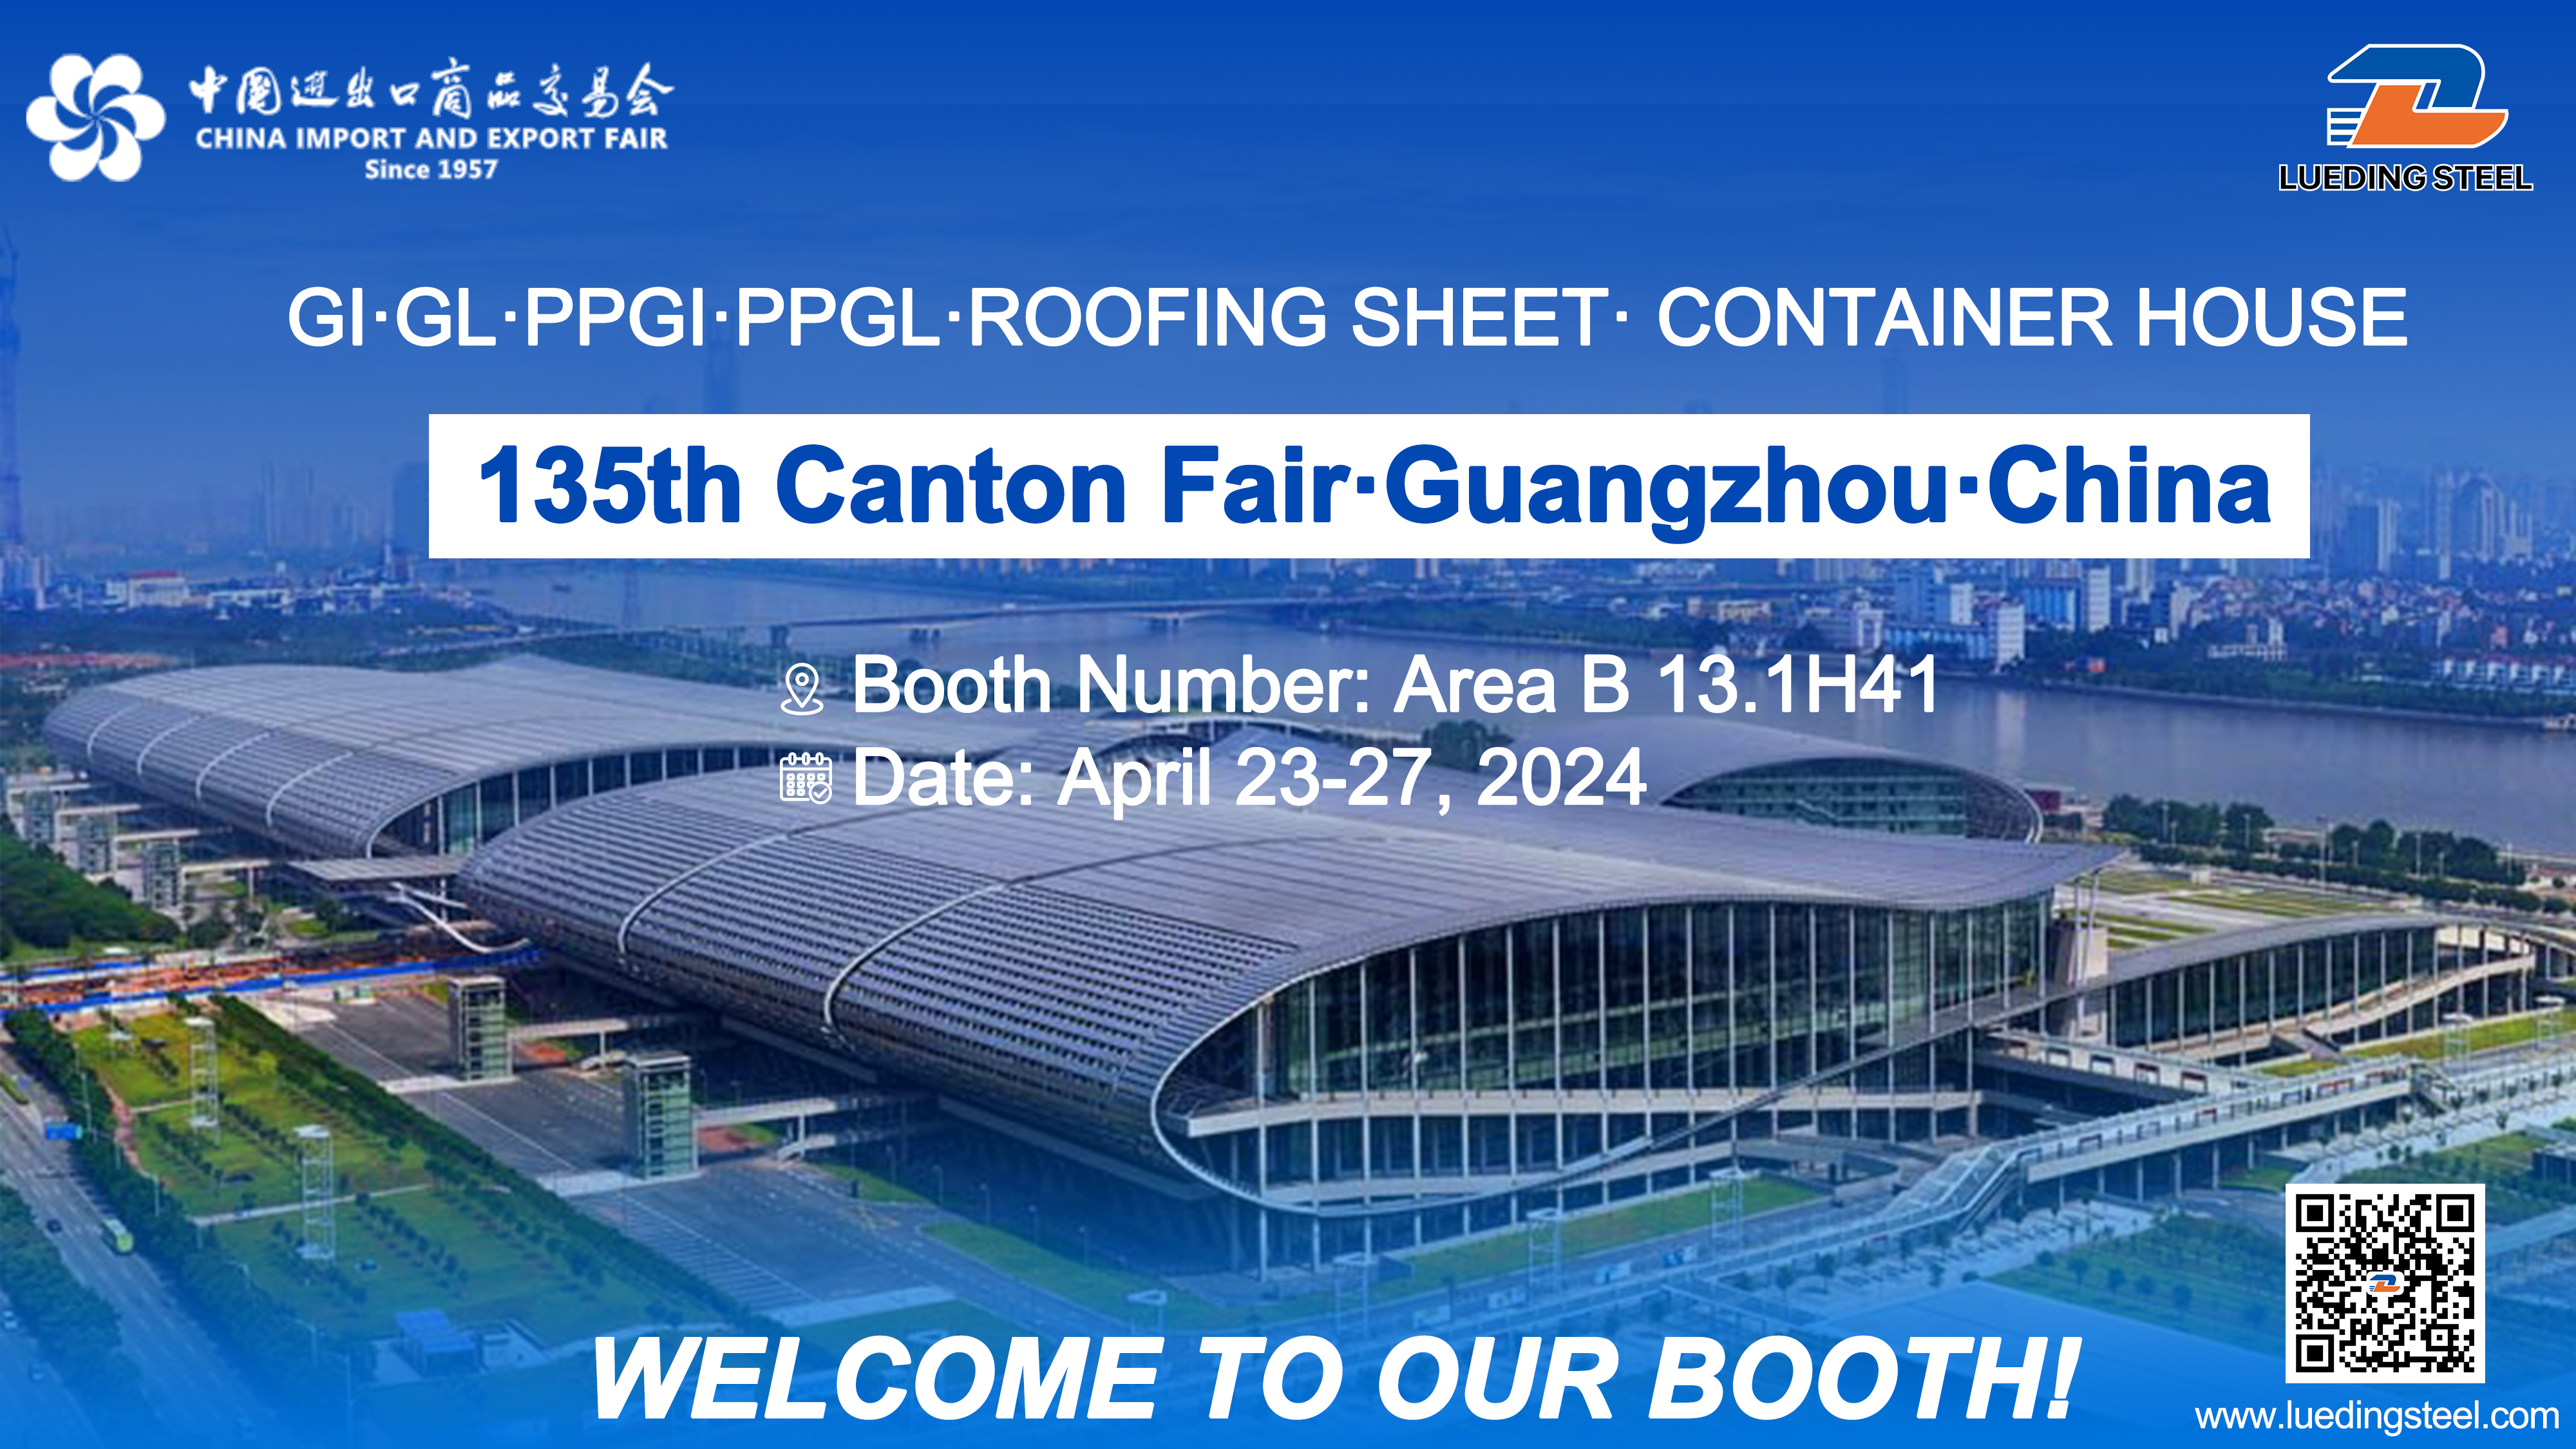 The much-anticipated 135th Canton Fair is about to open!